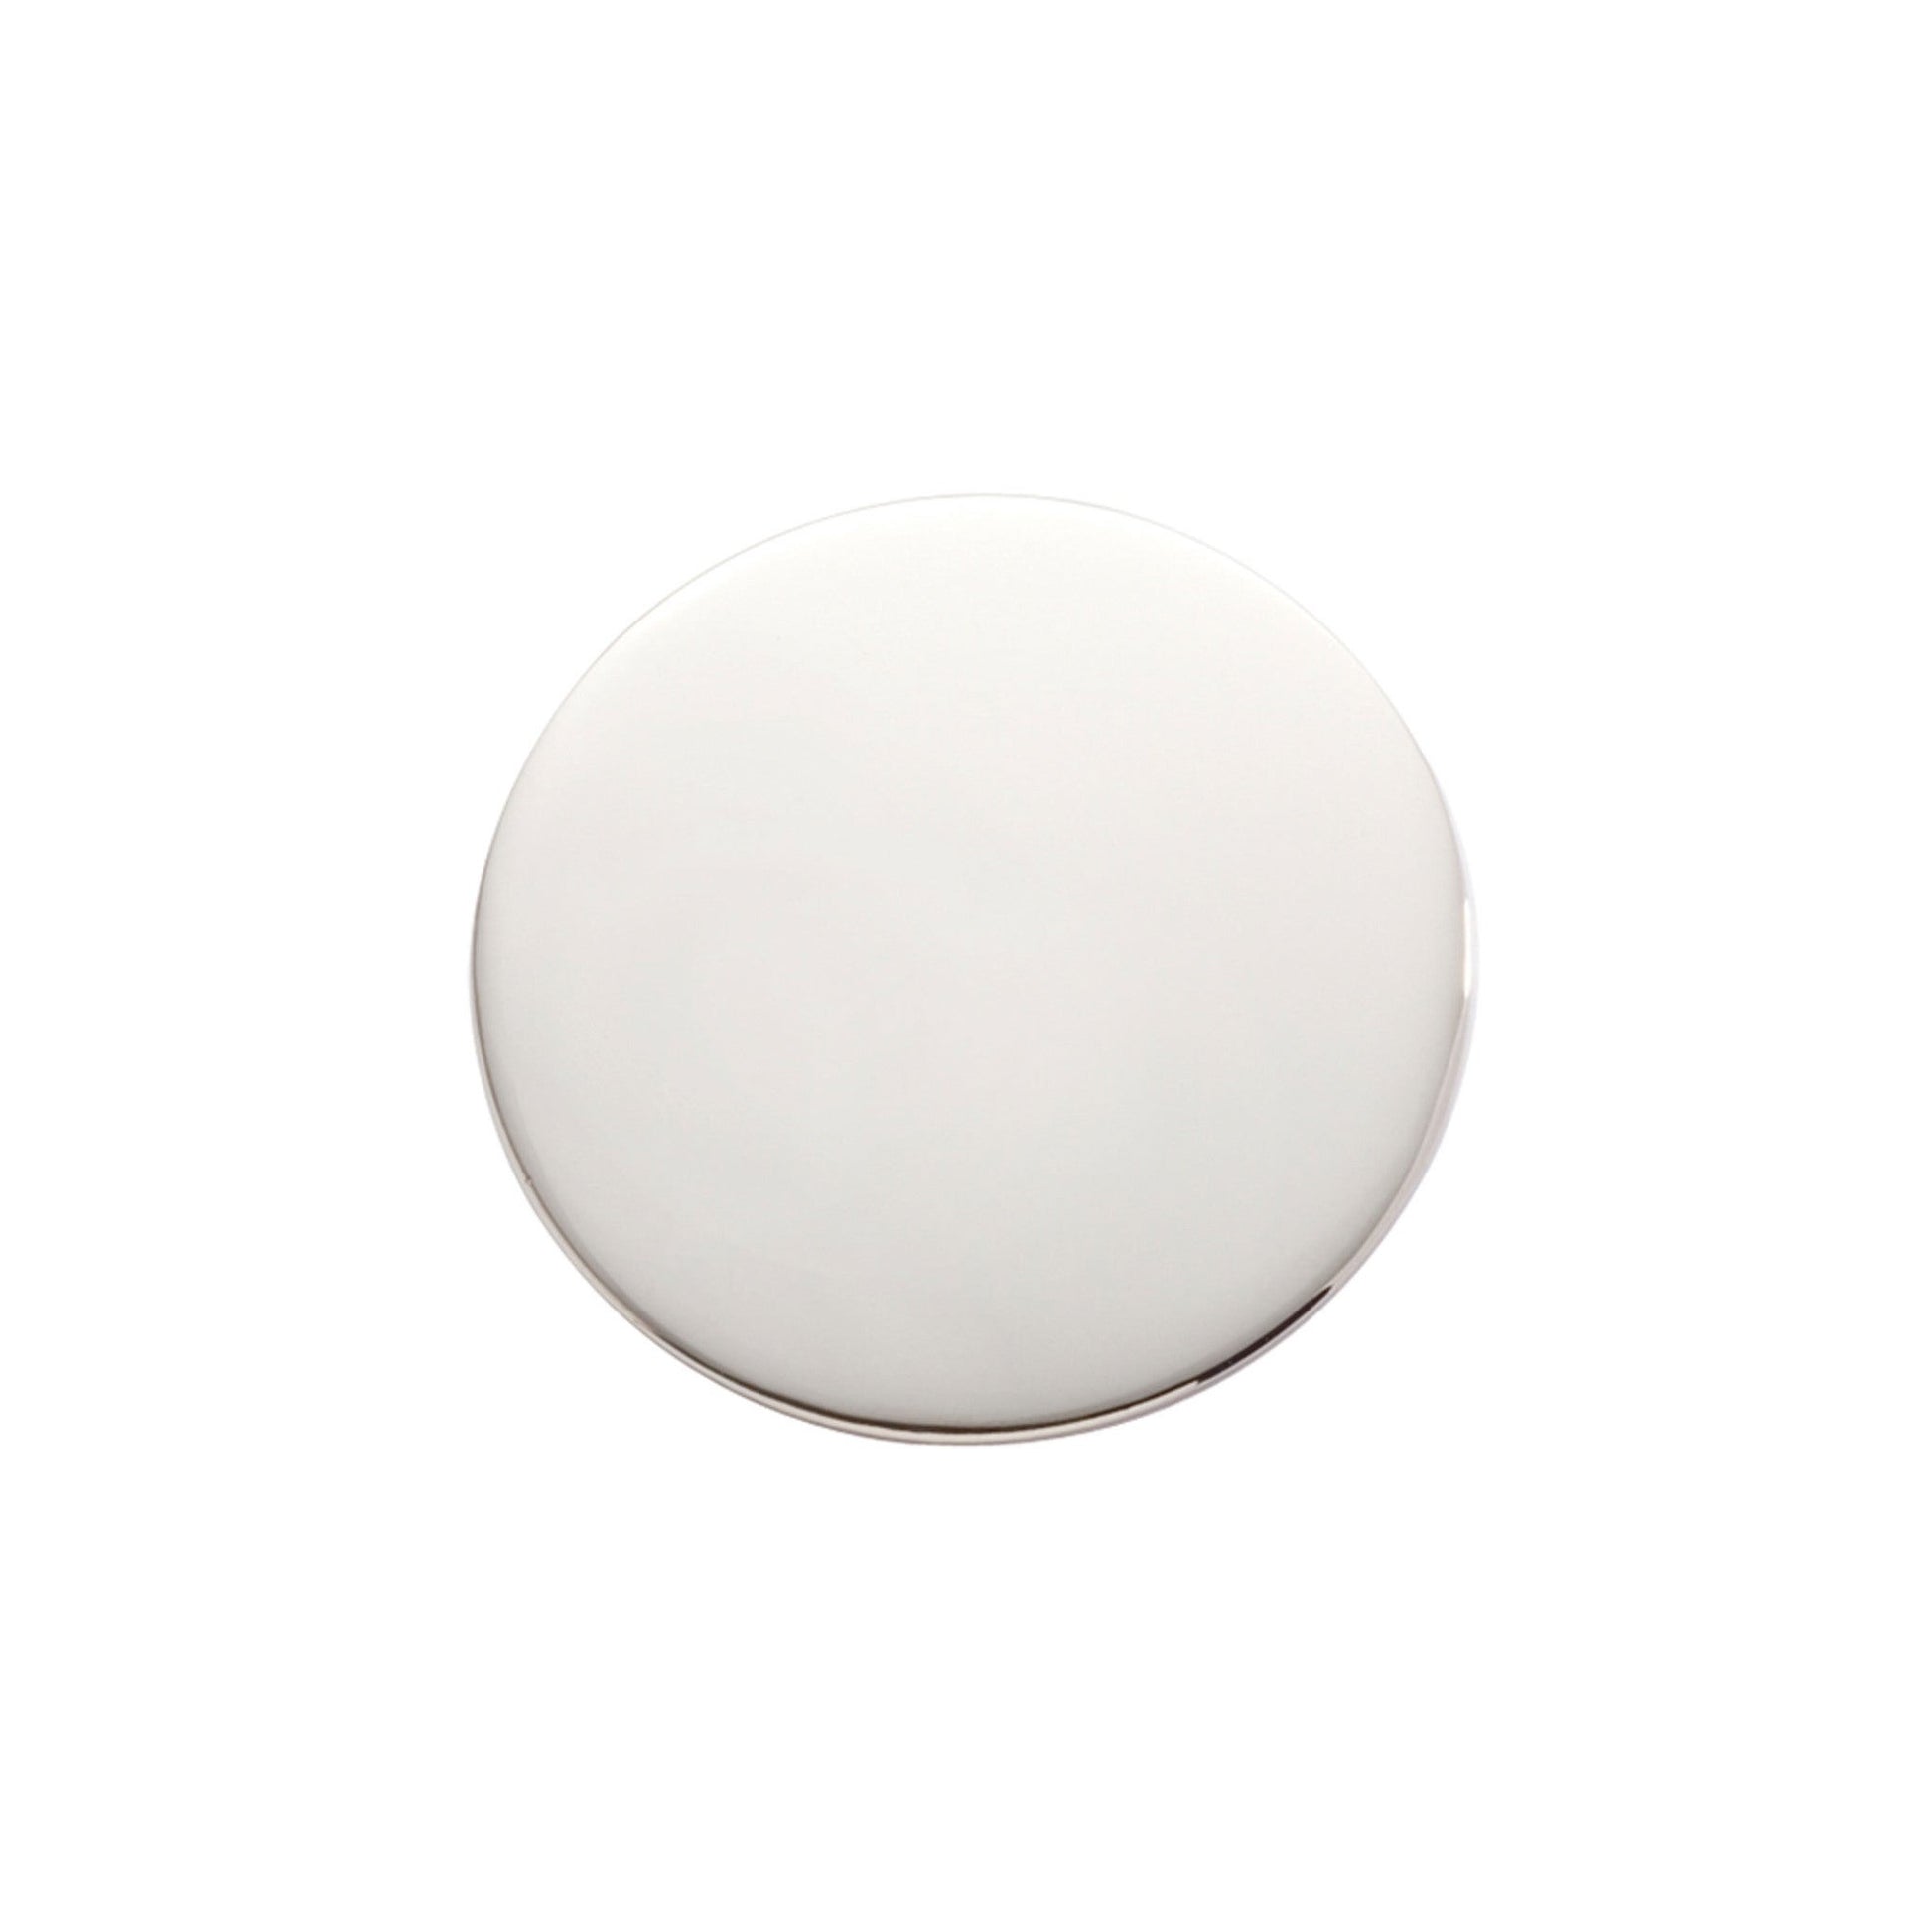 A polished round pin displayed on a neutral white background.